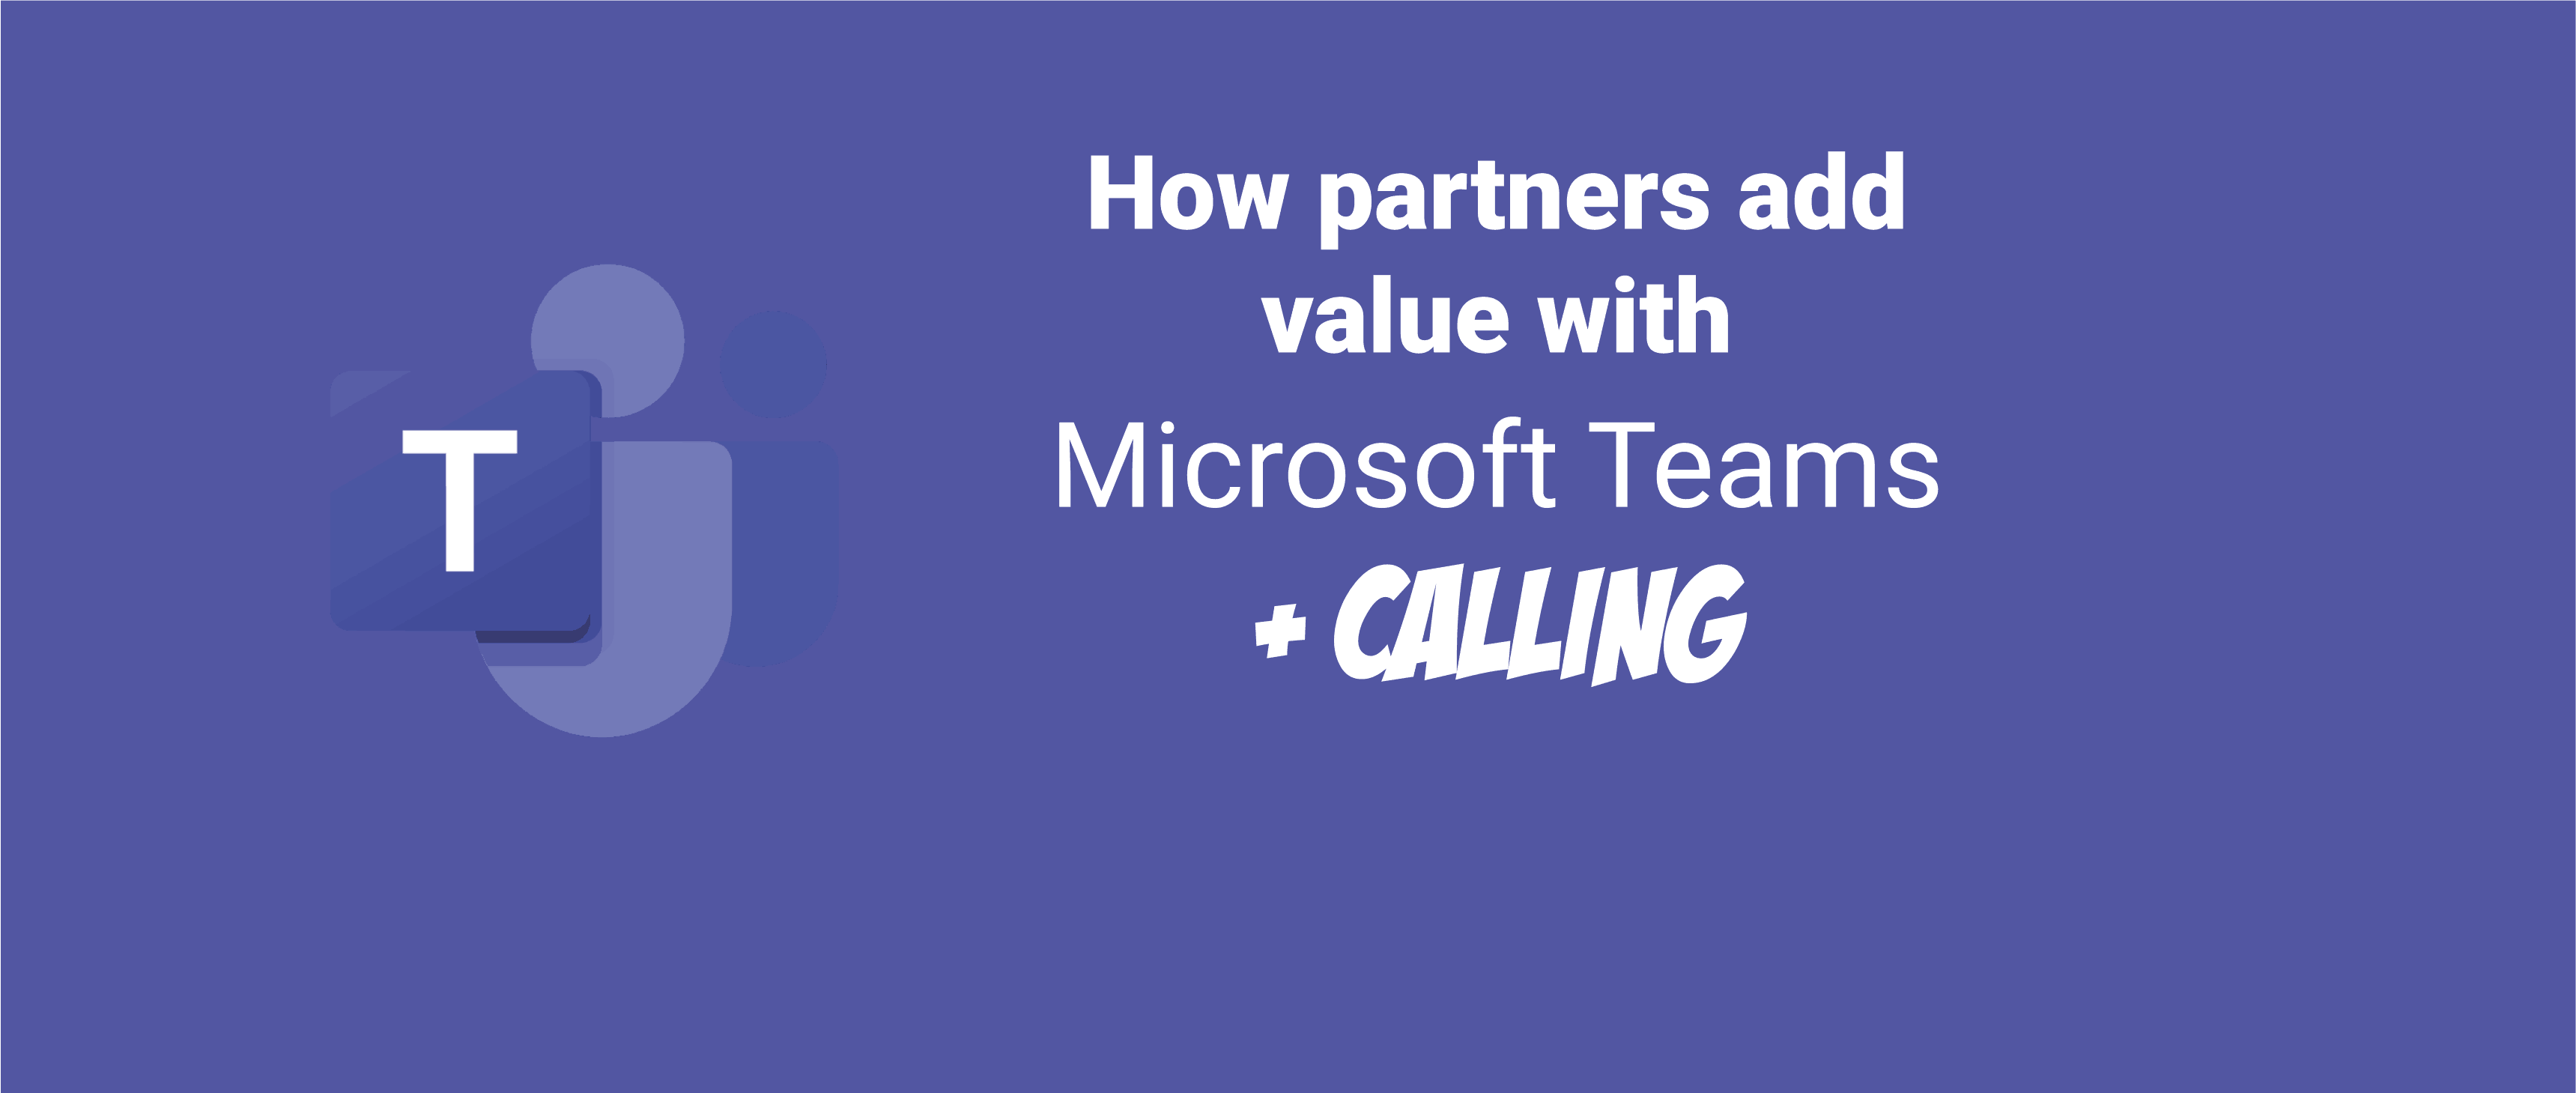 How partners add value with teams calling